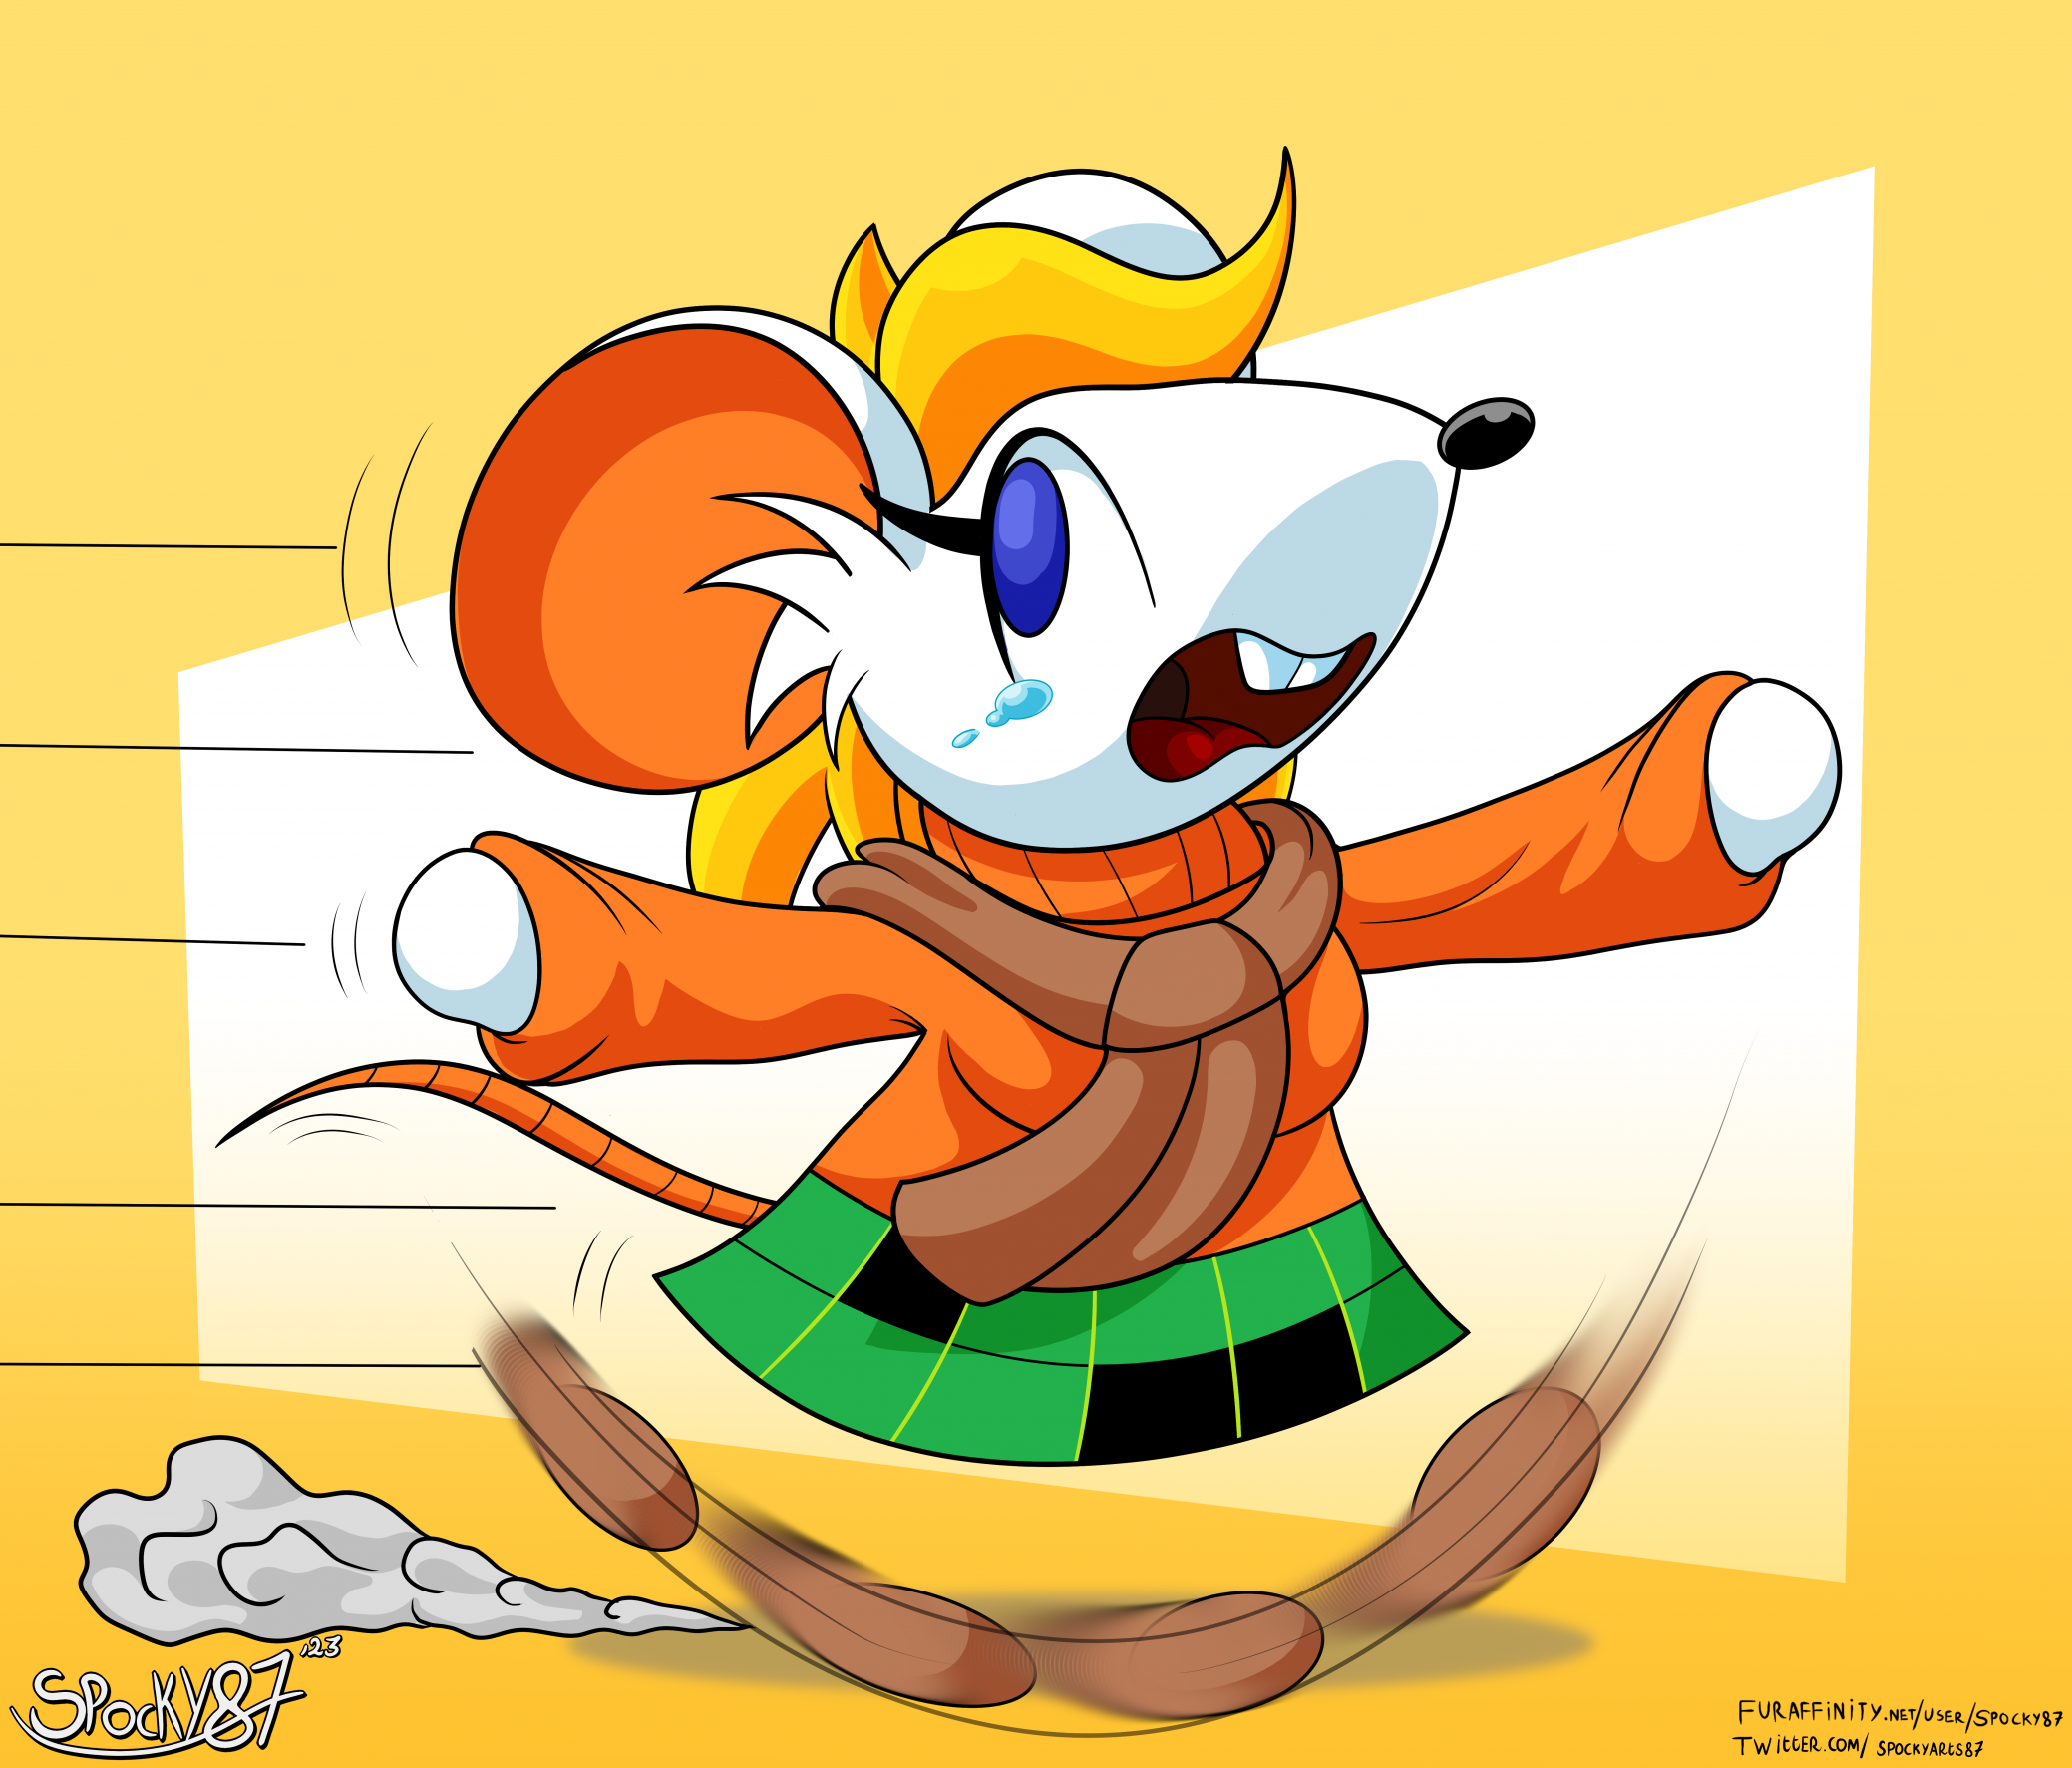 Drawing - Mokey the MOUSE and Sunky the Game Chara by Abbysek on DeviantArt